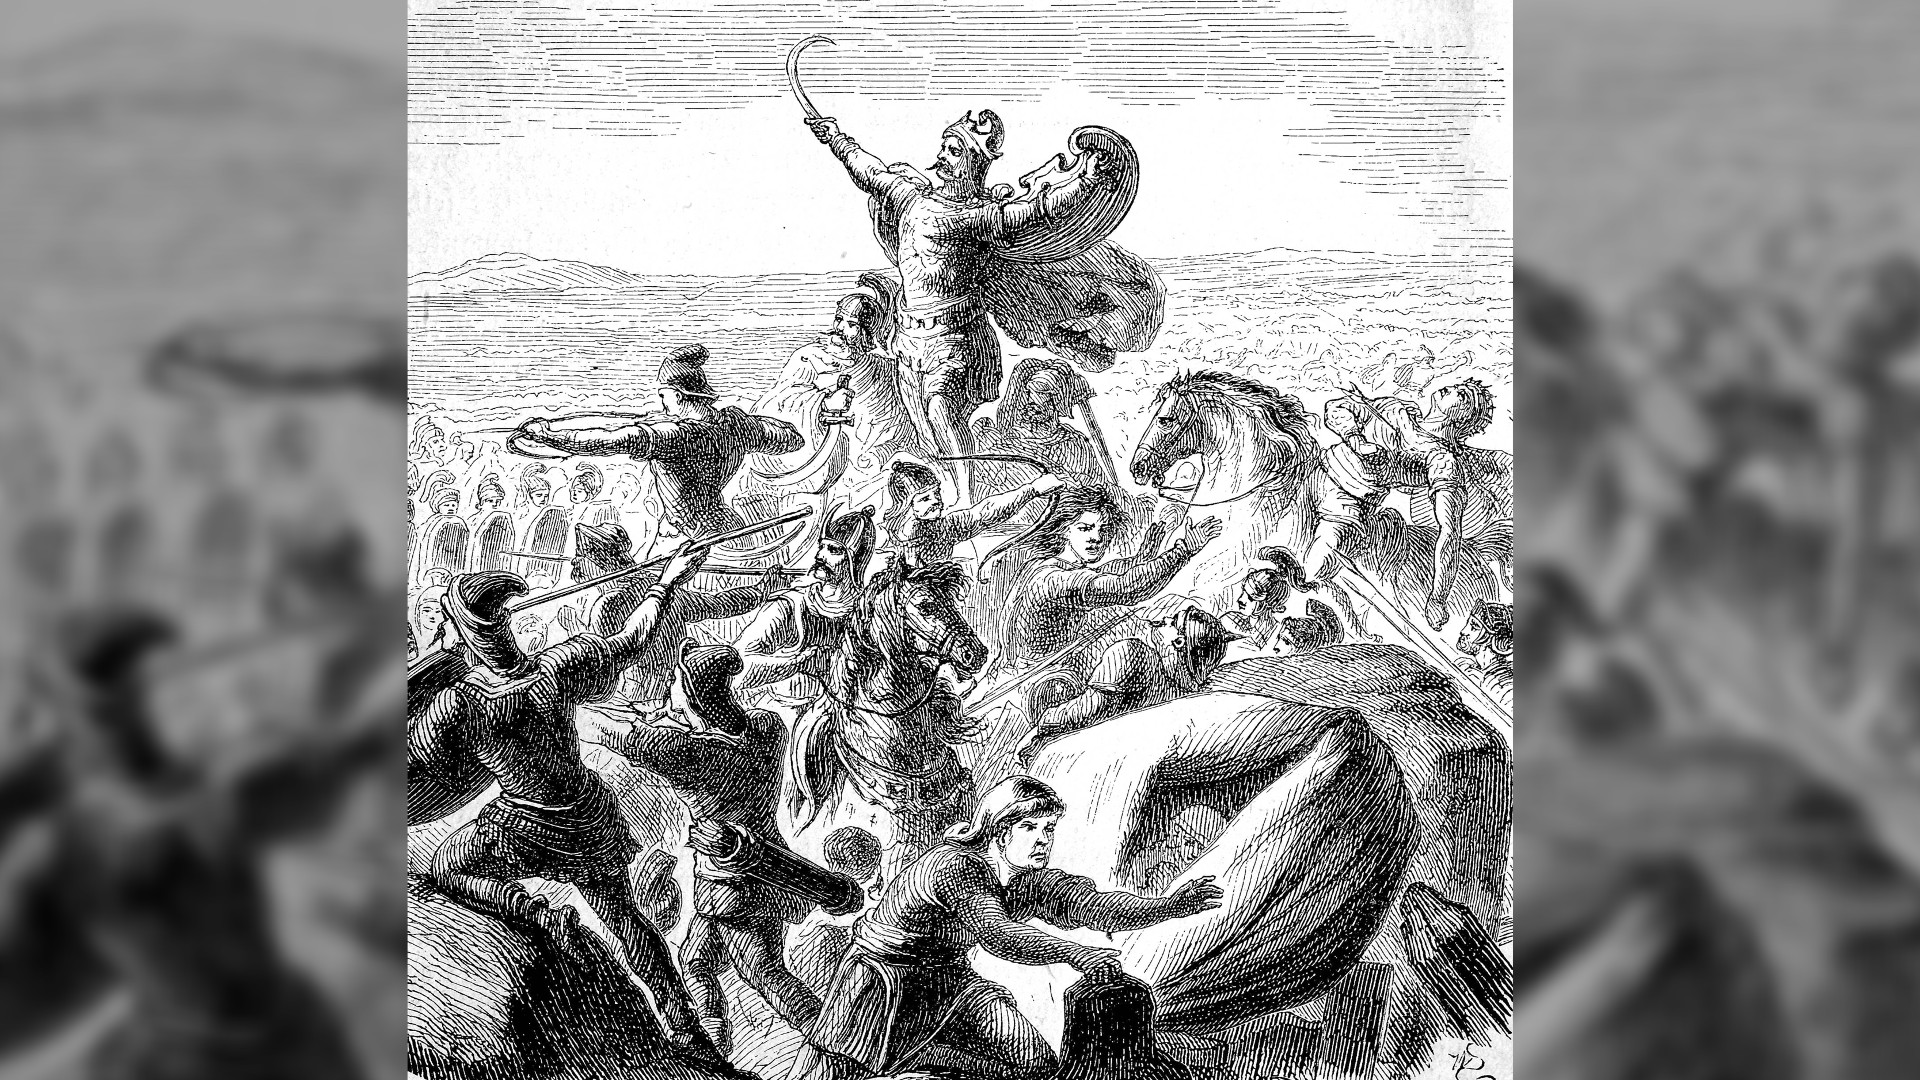 A black and white painting showing Roman general Flavius Aetius and the Visigoth king Theodoric I fighting against the Huns. Rising above everyone else is a moustachioed man with a billowing cloak. He is holding a curved sword in his right hand and a shield attached to this left. Beneath him there is a lot of fighting going on: some people are on horseback, some are holding bows and others spears. In the background you can see the Roman army with this large shields, spears and Roman helmets.